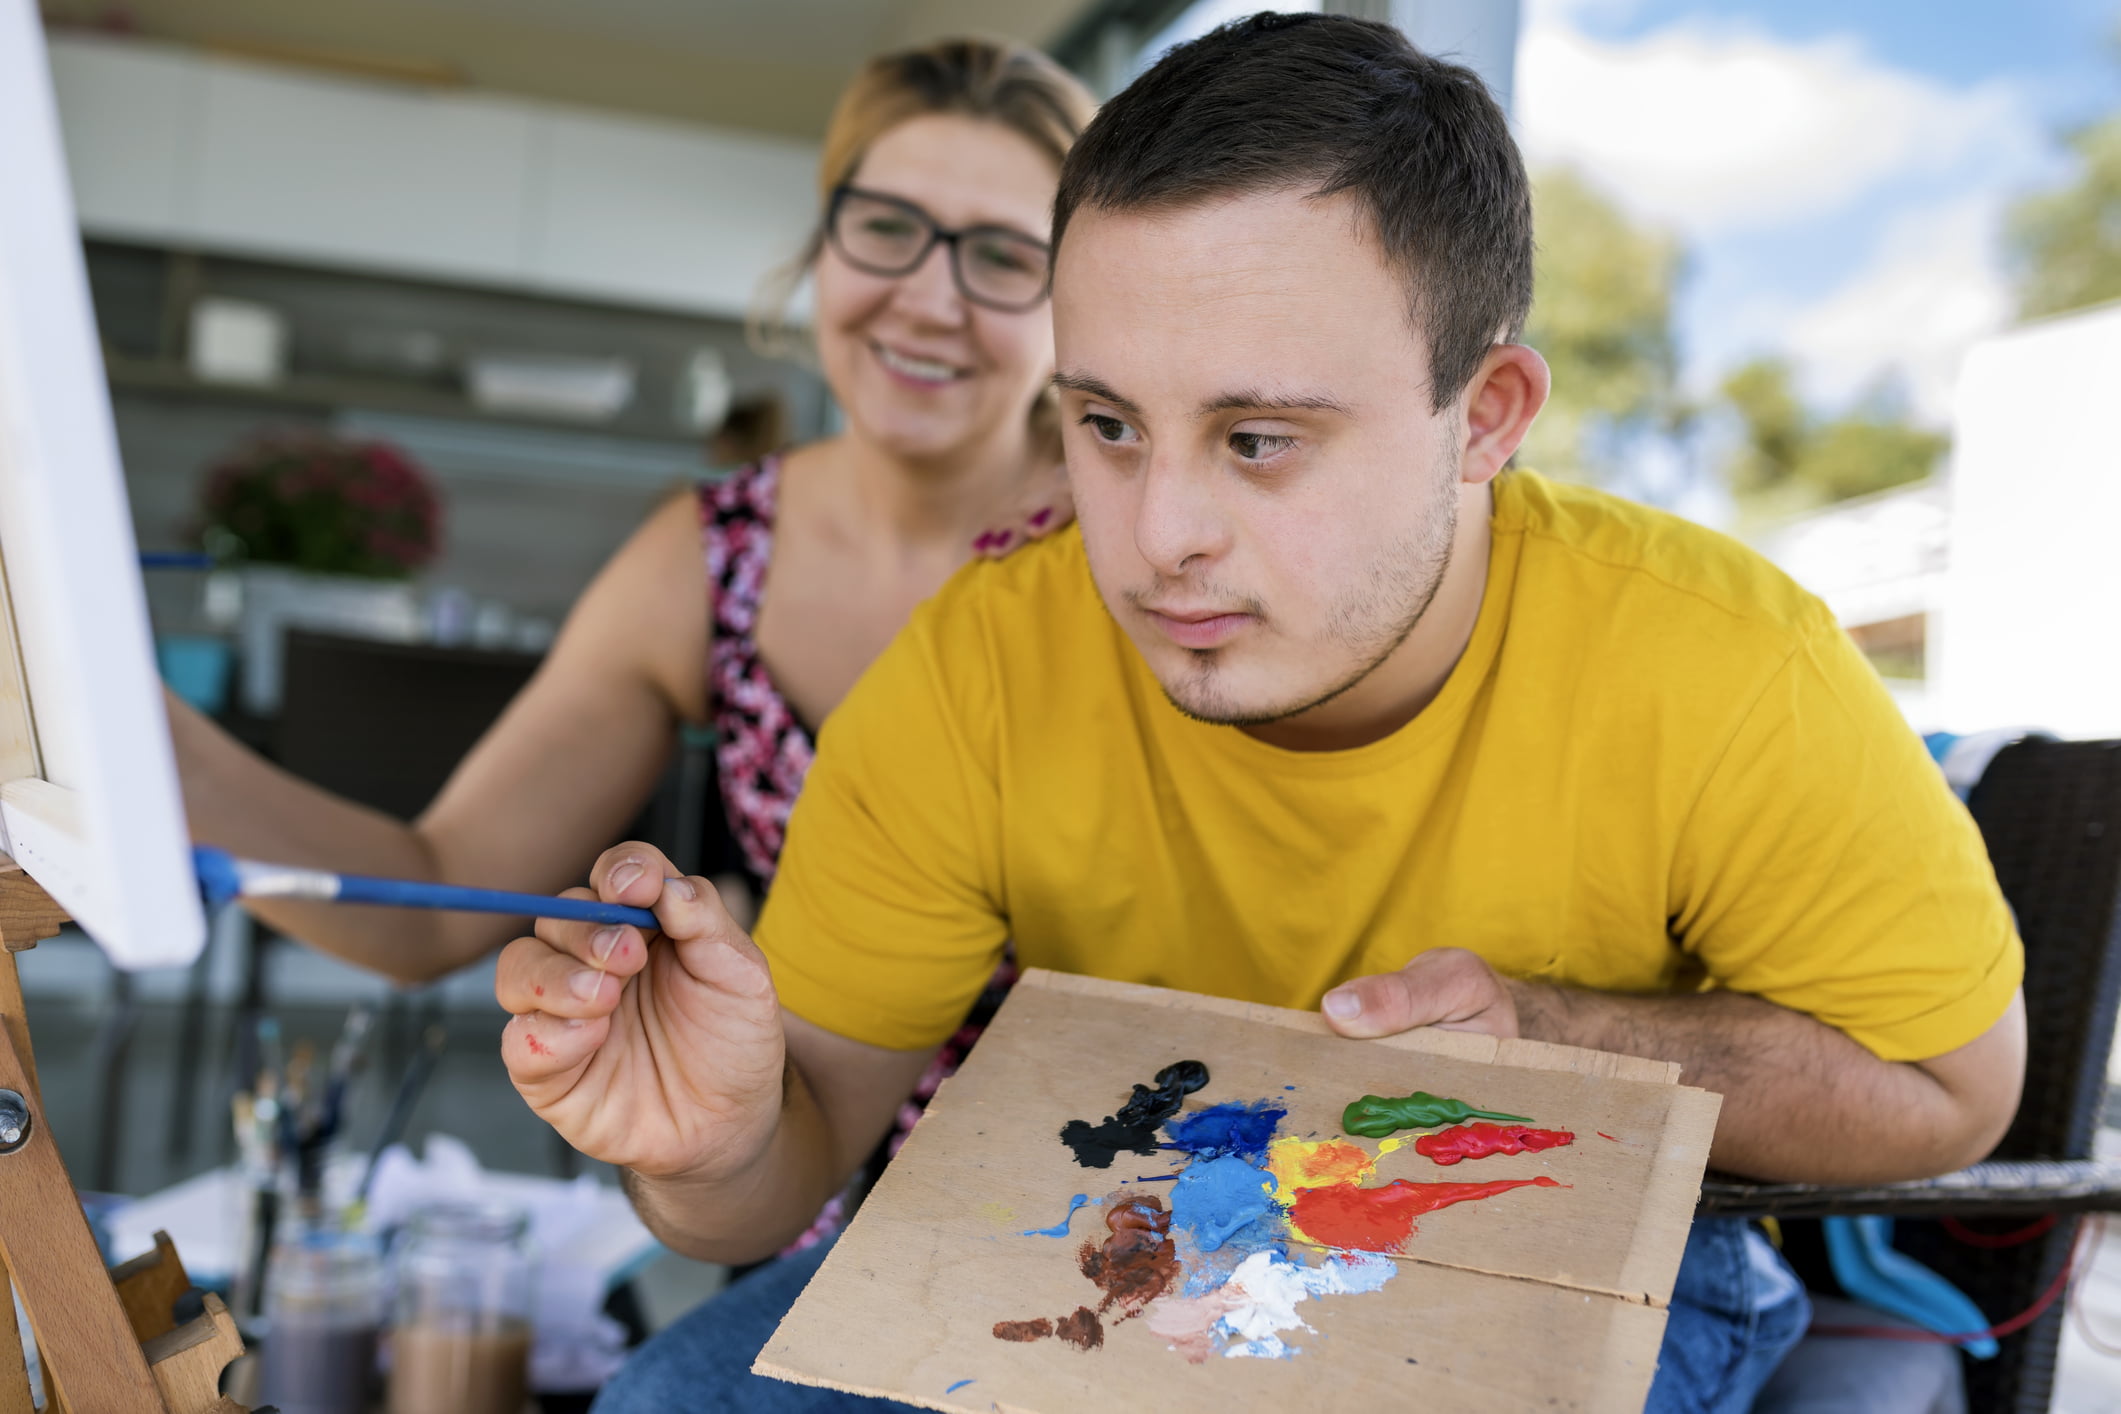 Teenager artist with Down syndrome